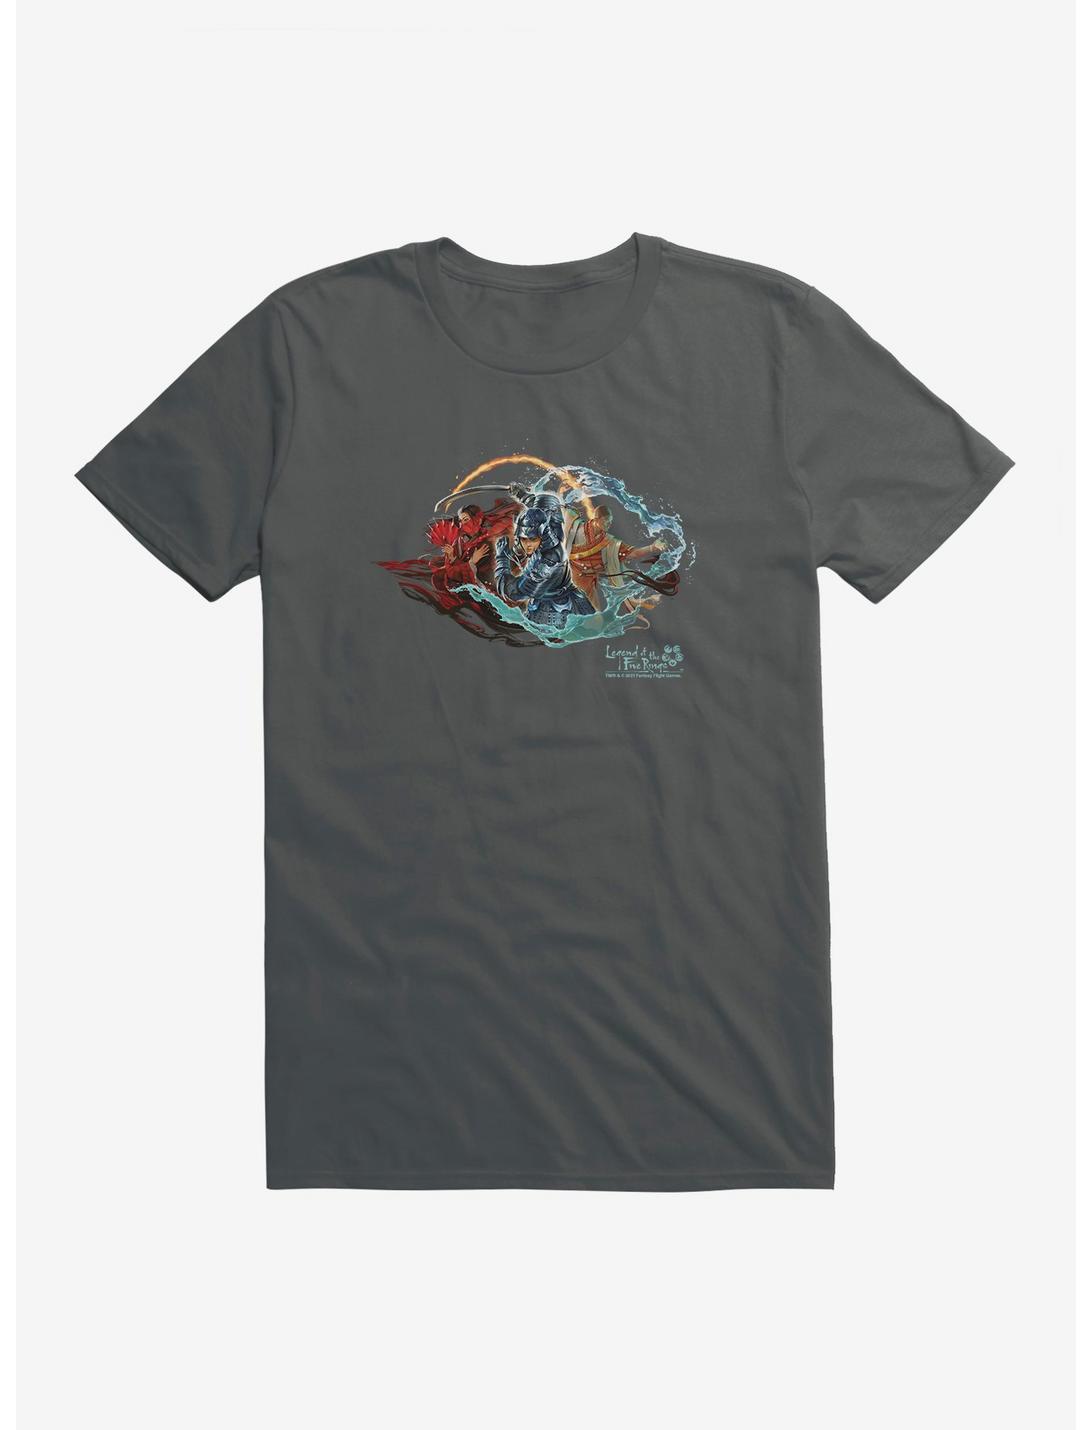 Legend Of The Five Rings Elemental Cycle T-Shirt , CHARCOAL, hi-res